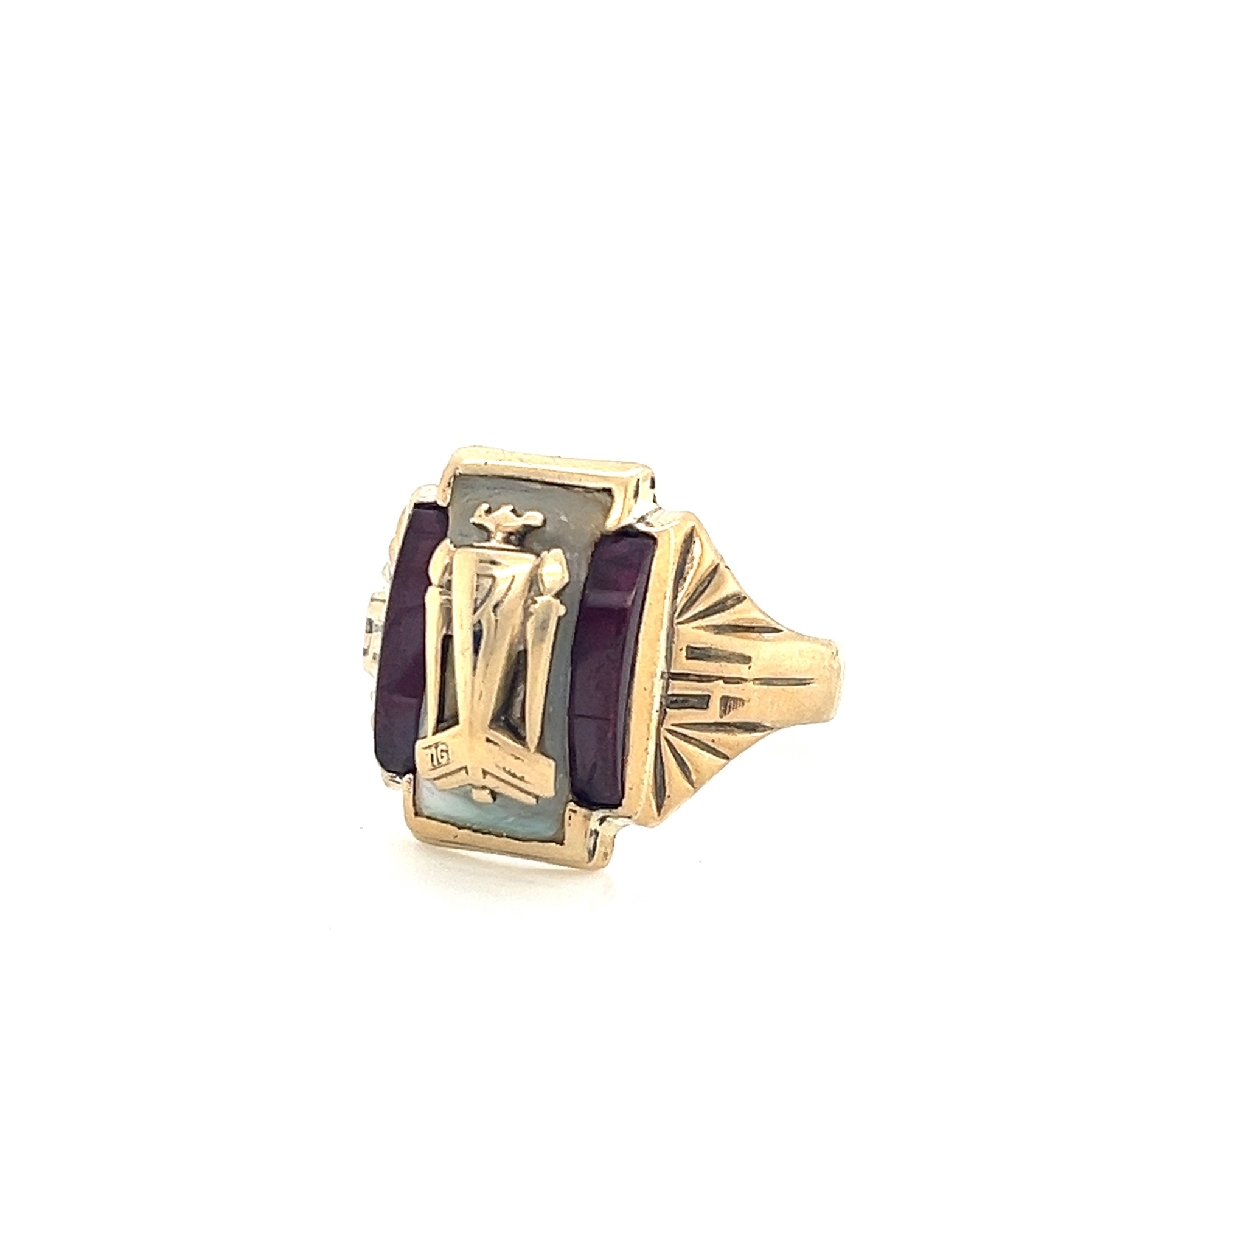 10K Yellow Gold and Sterling Silver class ring size 9 